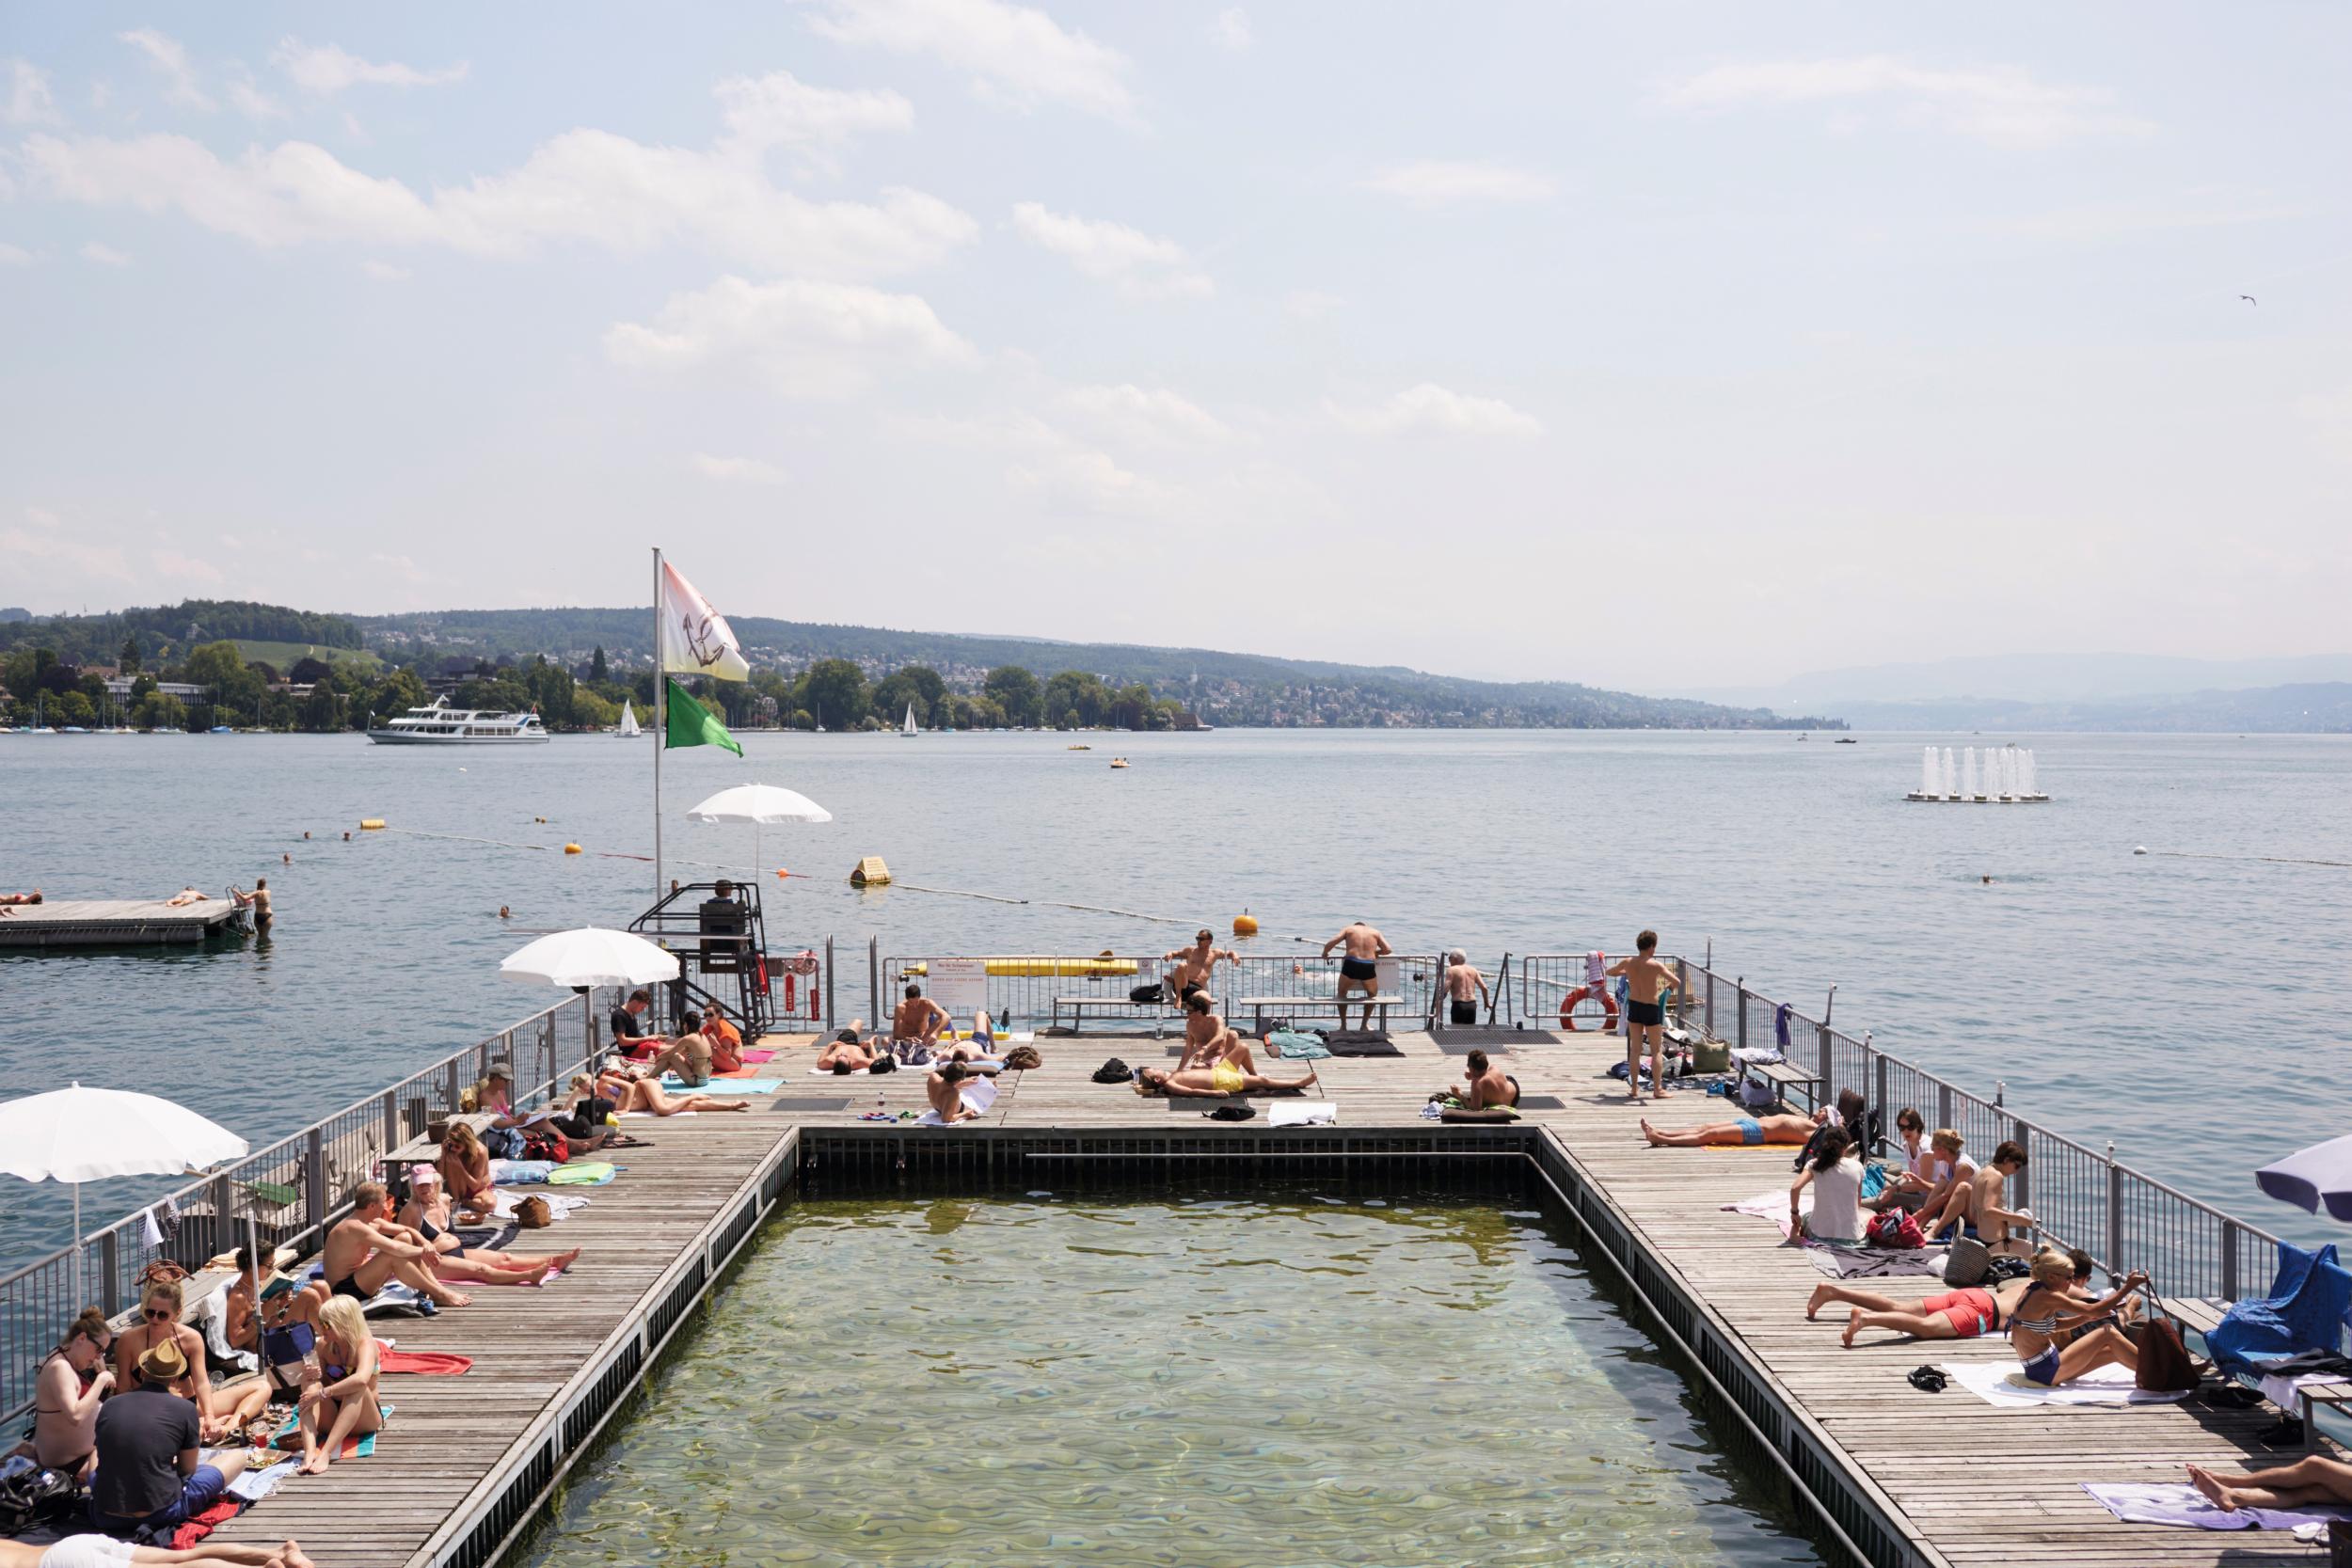 Take in the unrivalled views of Lake Zurich at Seebad Enge